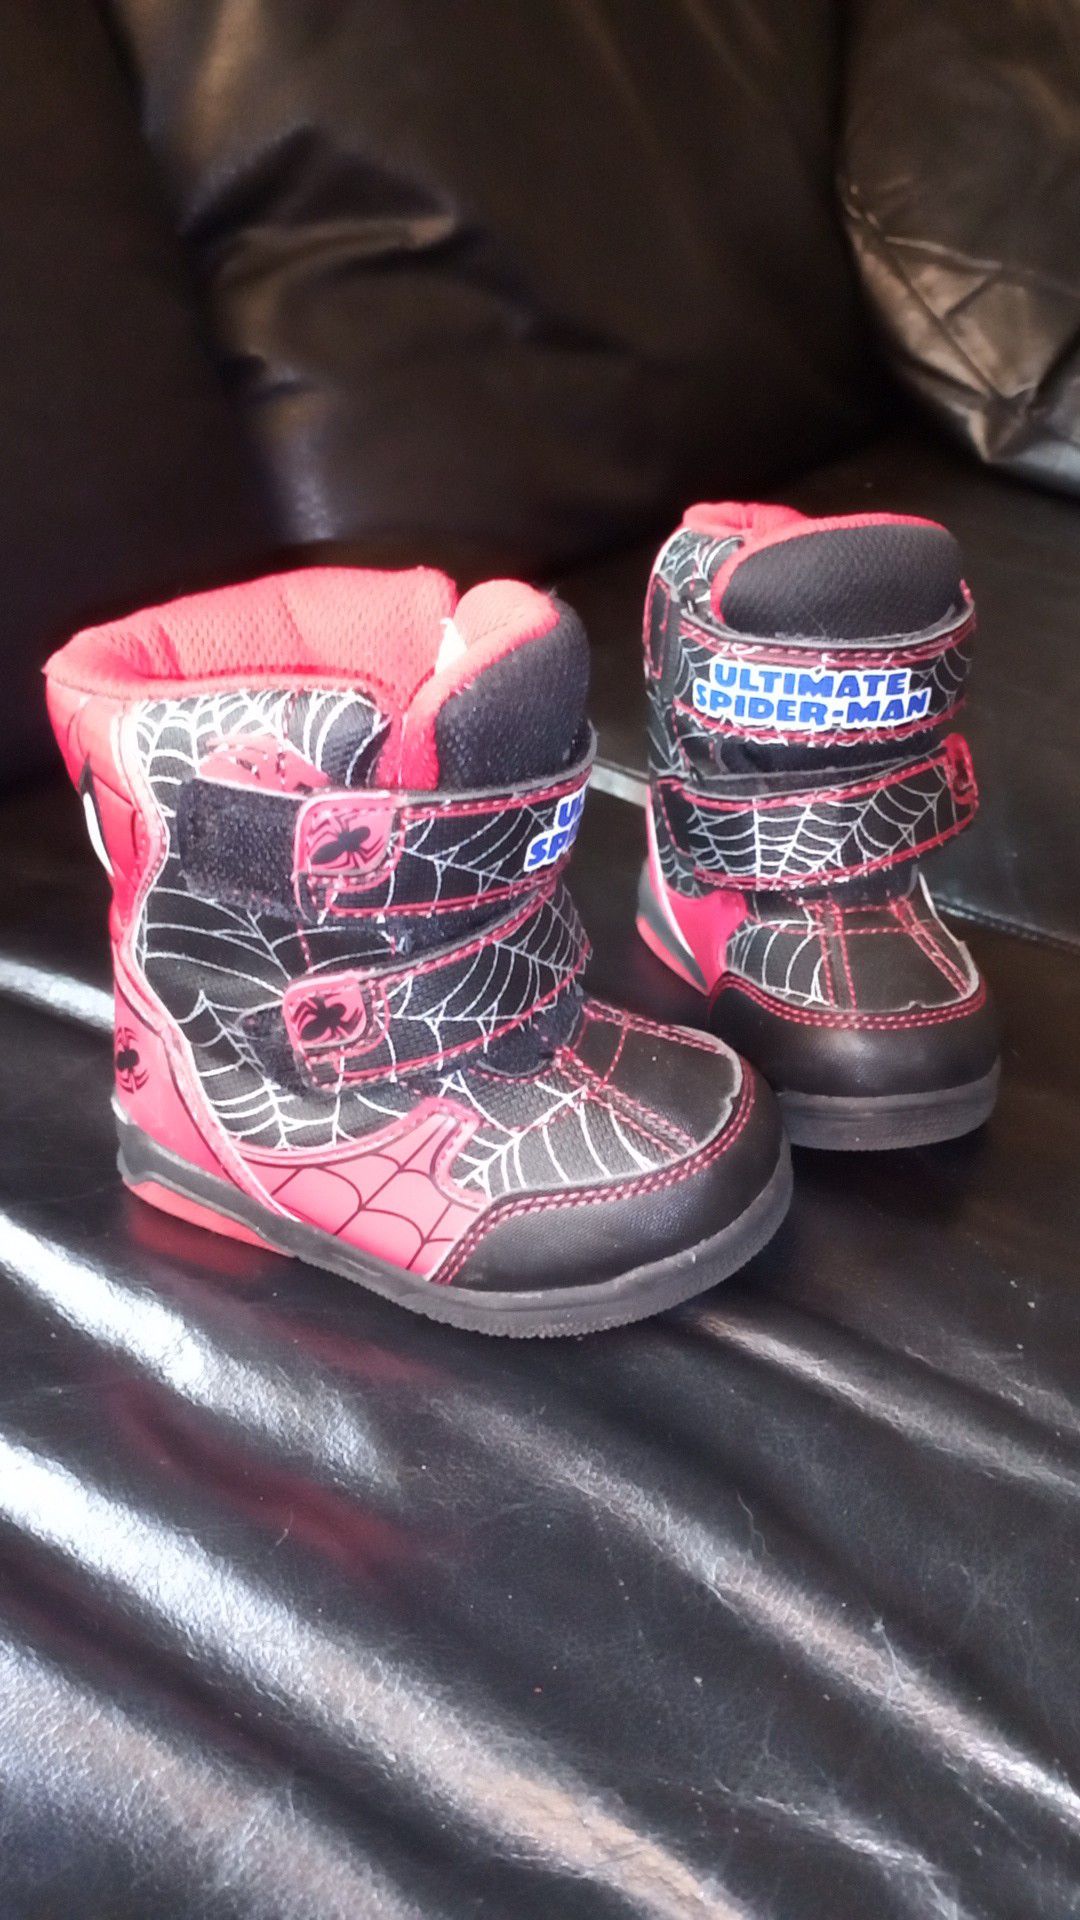 Spider-Man rain boots / snow boots size 5 toddler or infant in great condition made by marvel